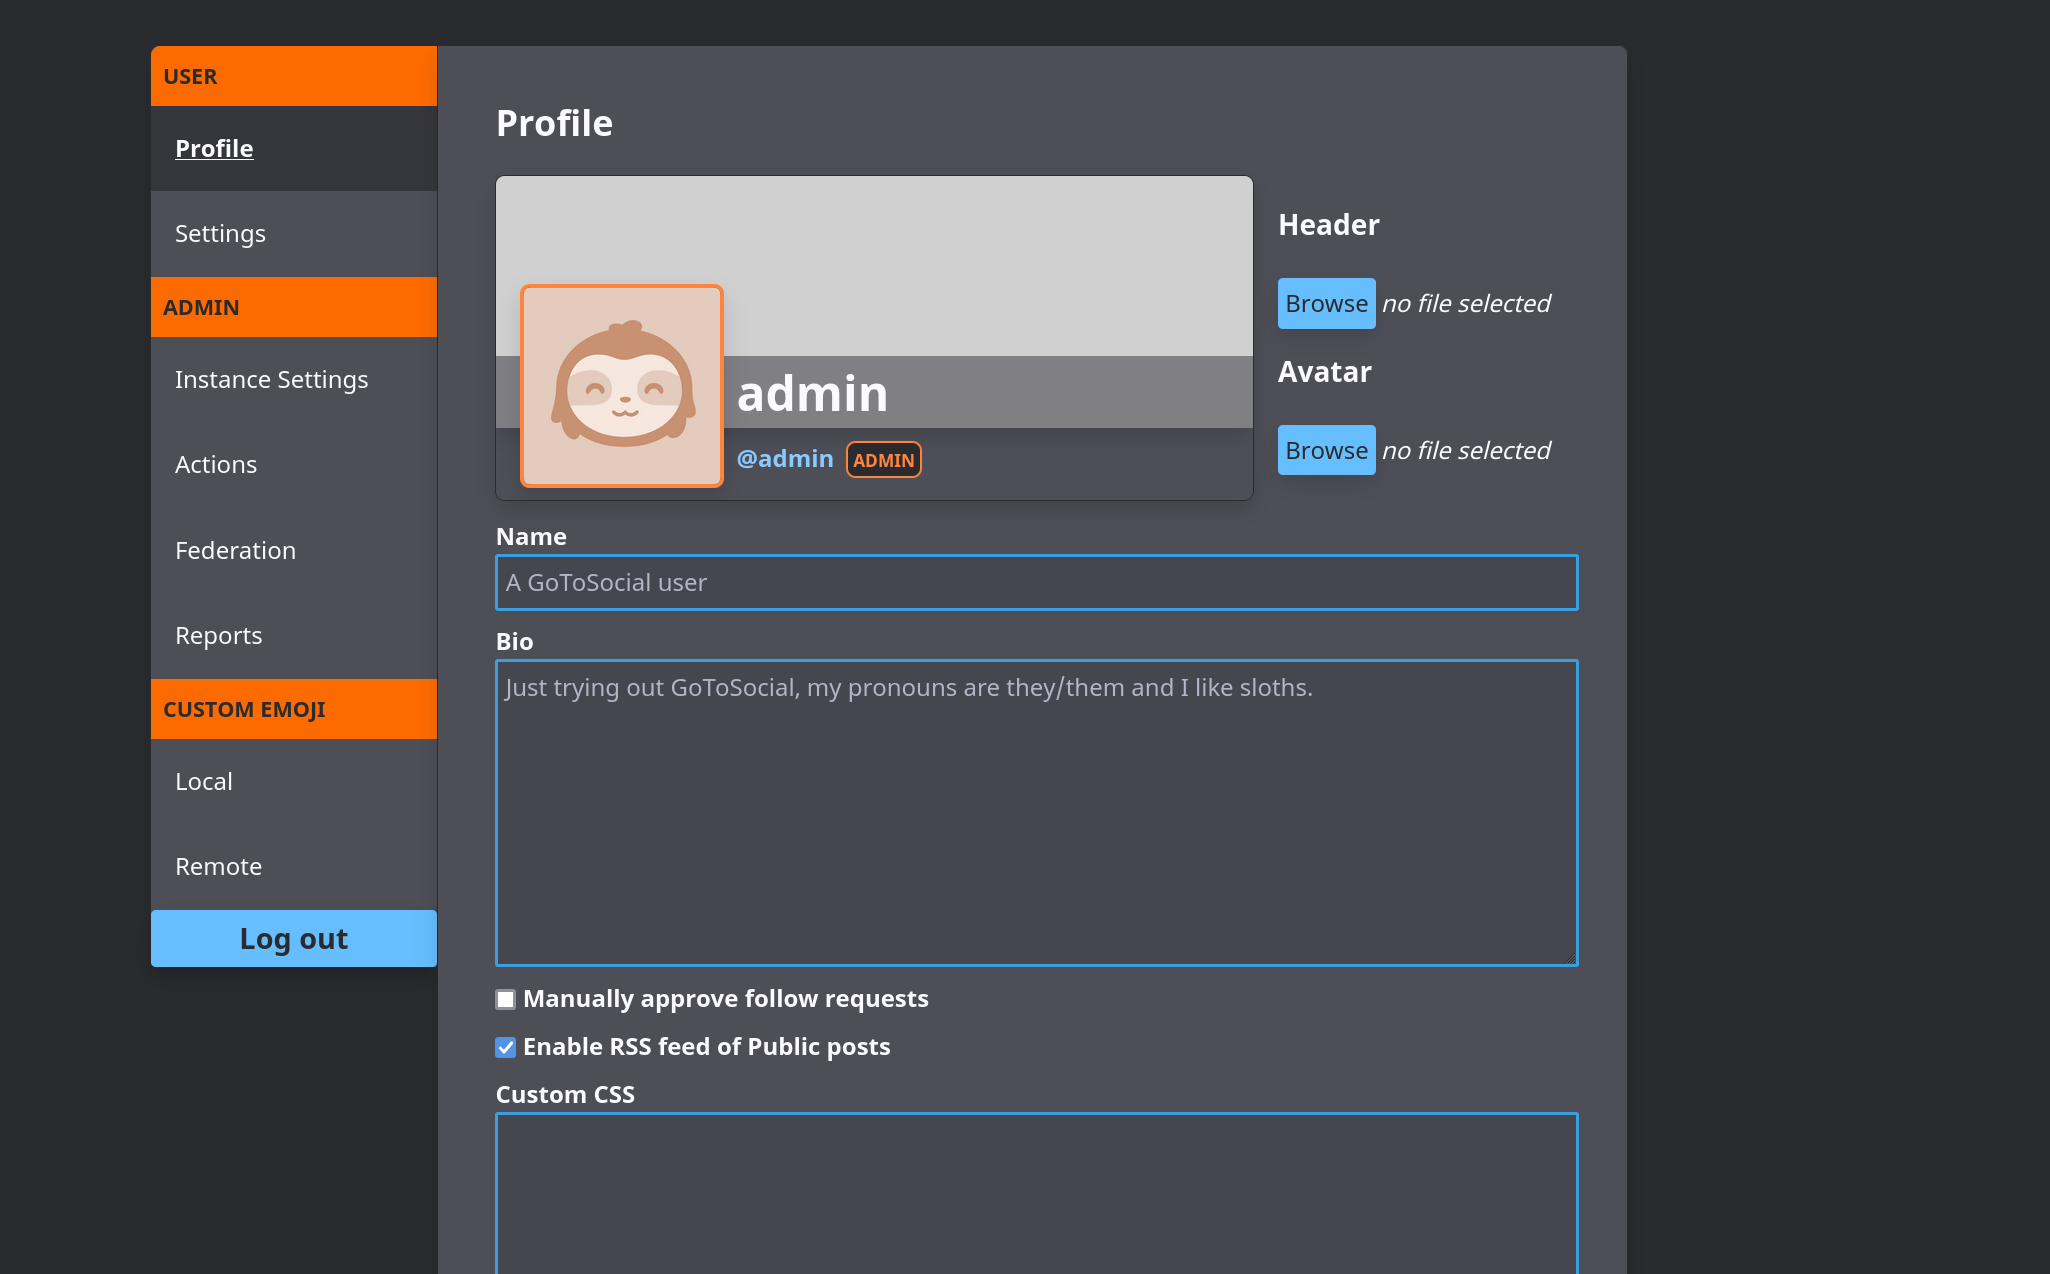 Screenshot of the profile section of the user settings interface, showing a preview of the avatar, header and display name, and providing form fields to change them